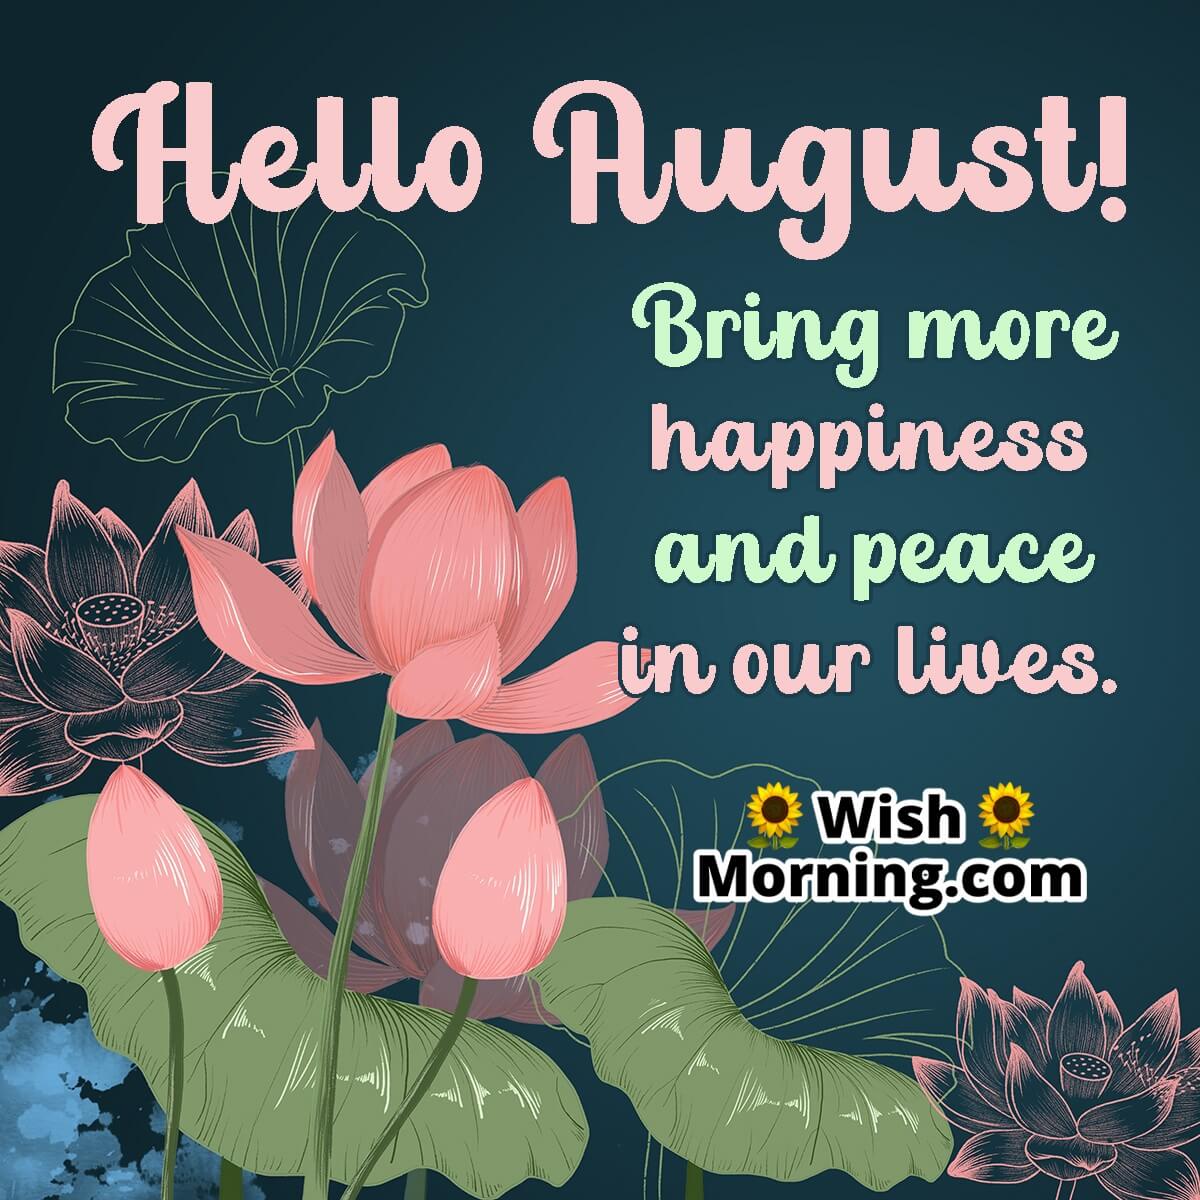 August Month Wishes